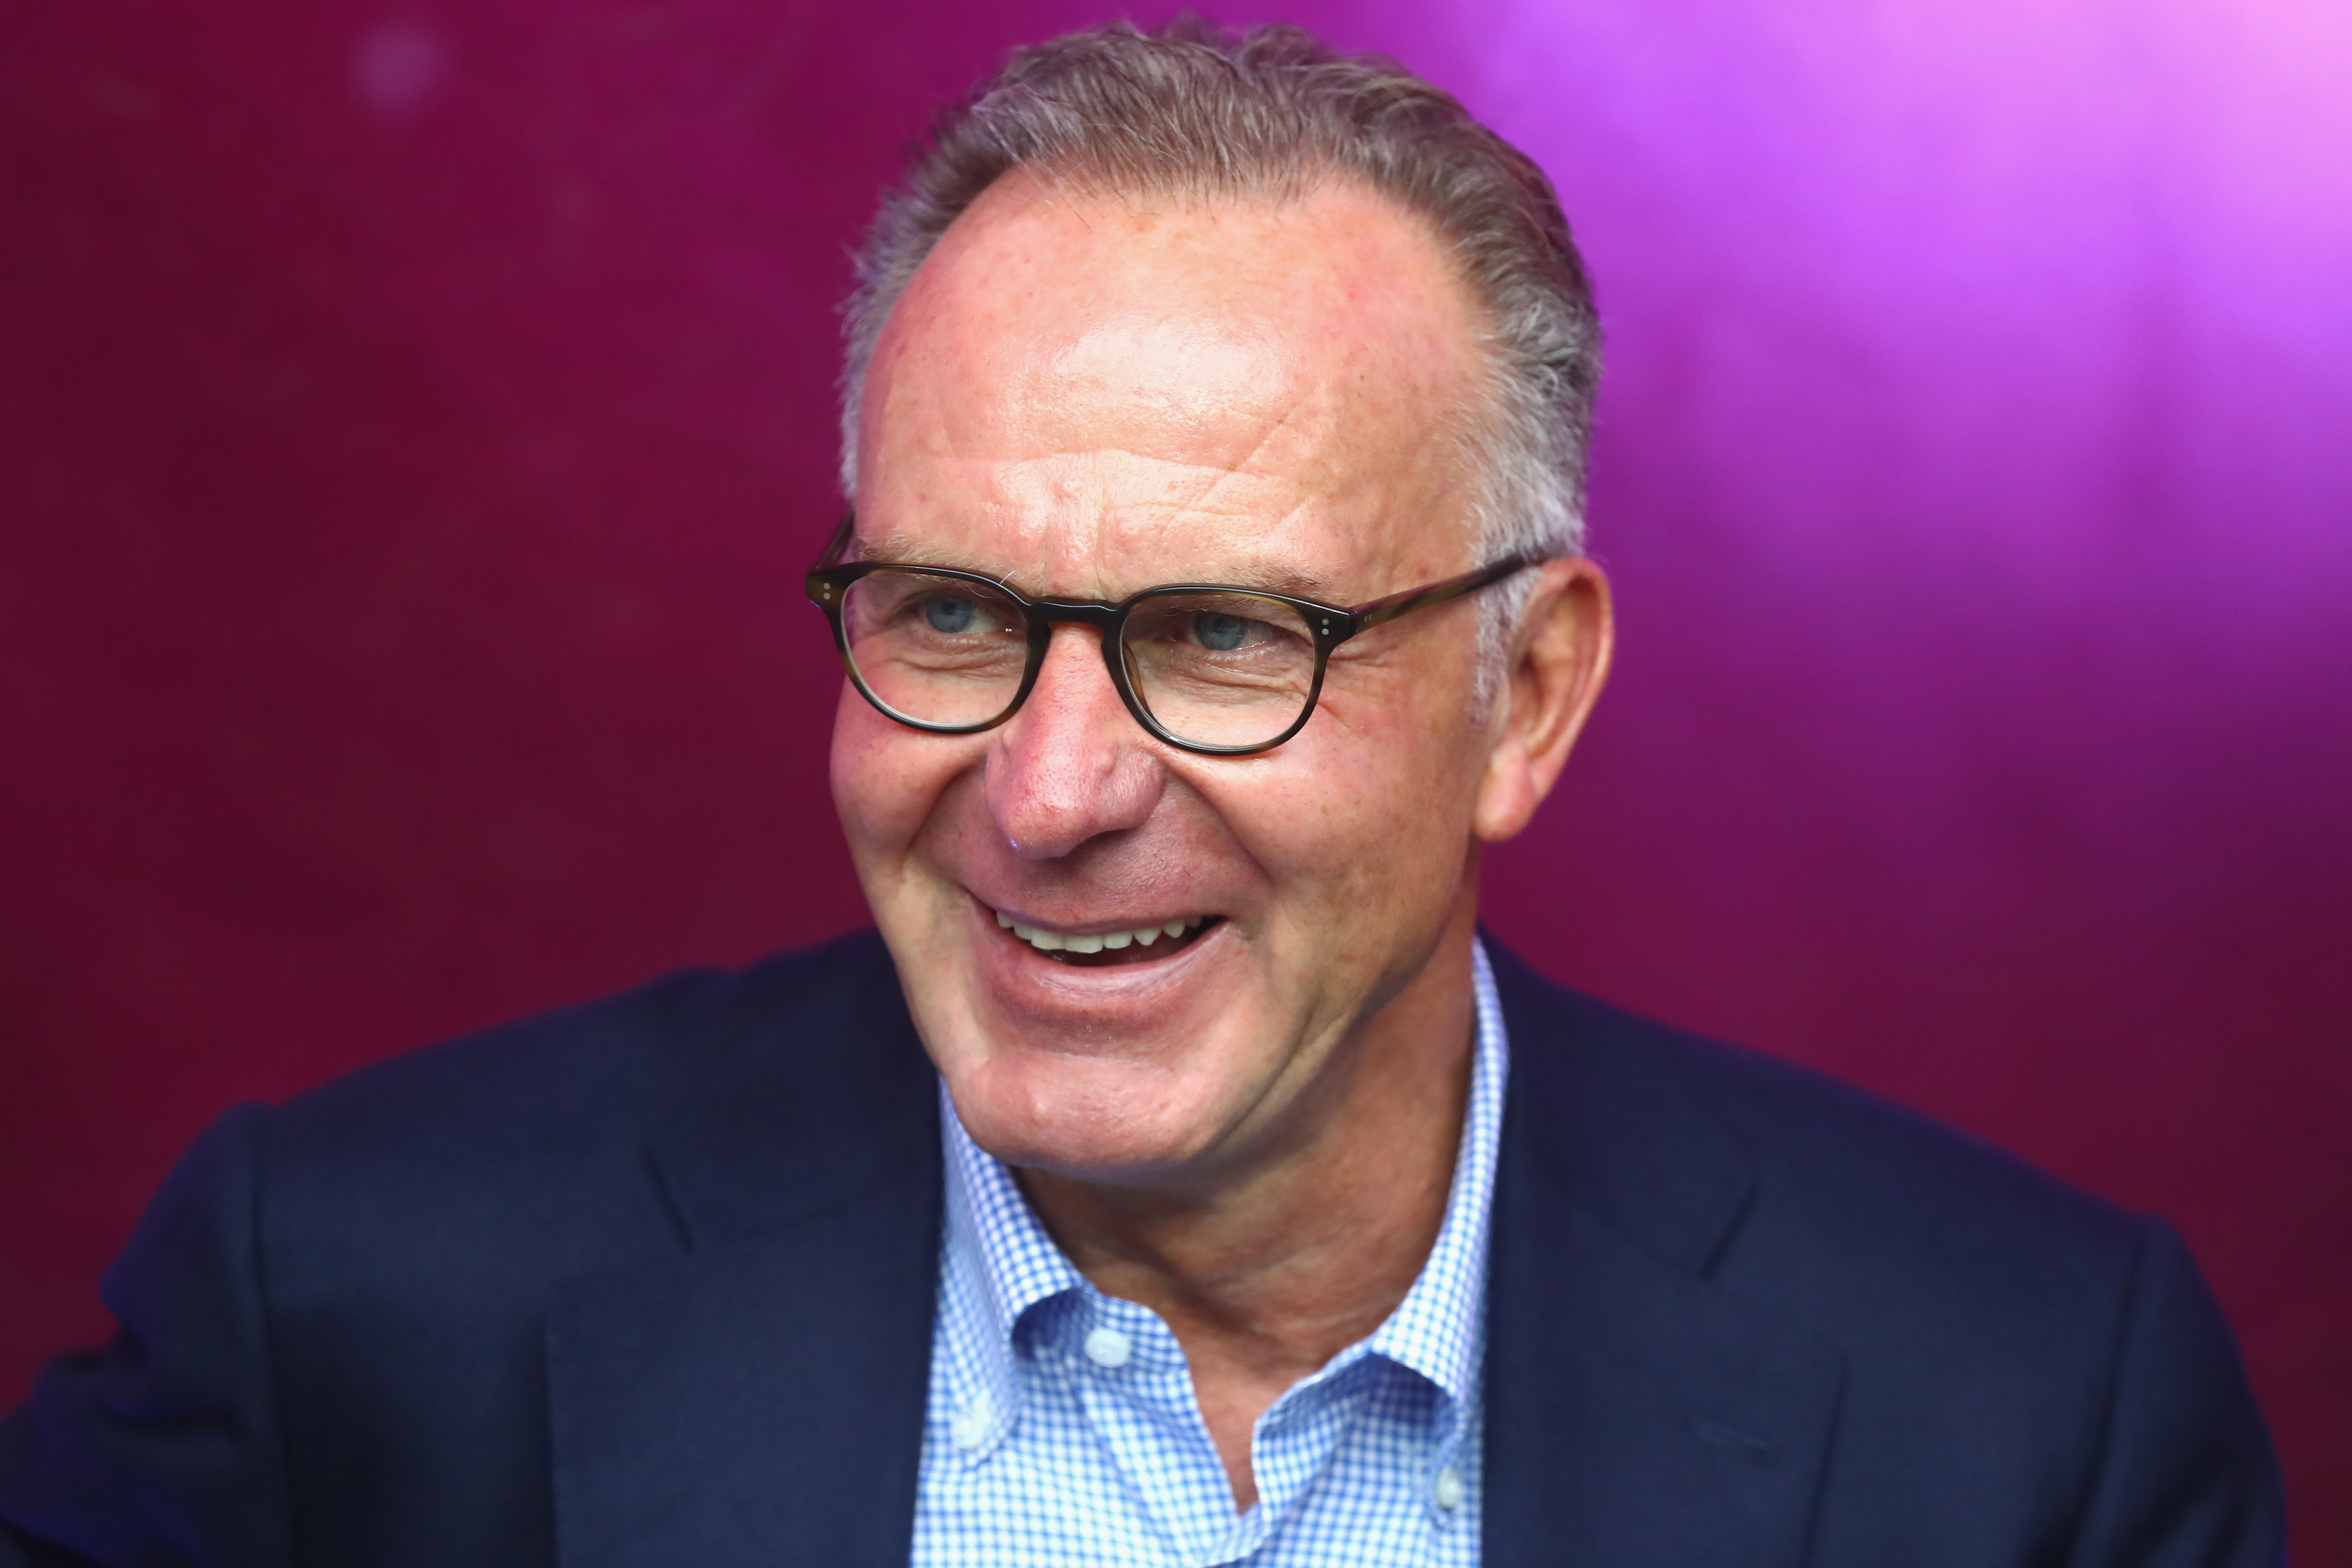 Bayern Munich CEO Rummenigge: “No Decision Made Yet On Inter’s Ivan Perisic, Marcelo Brozovic? No Comment”